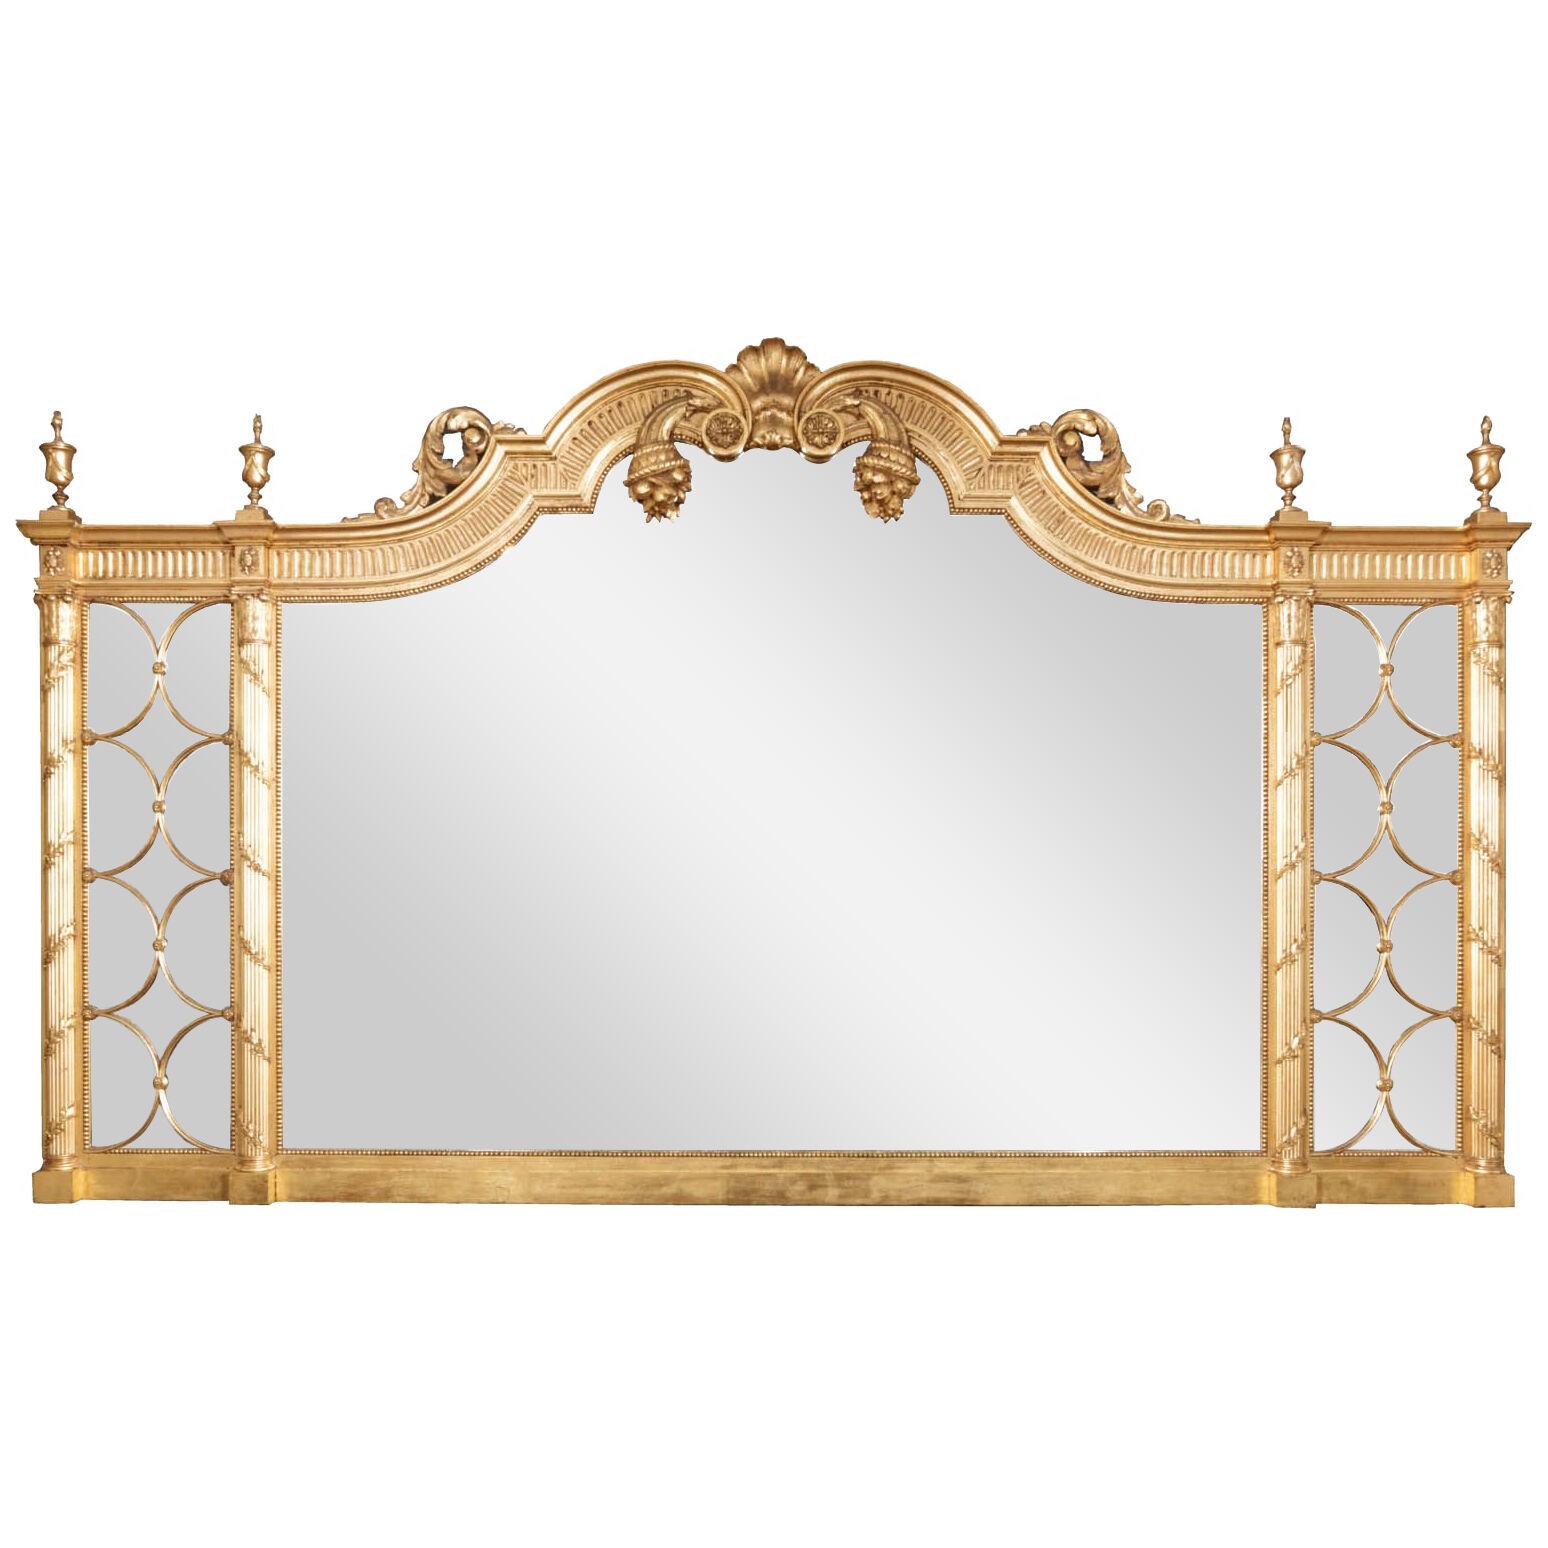 19th Century Overmantel Mirror With Elliptical Panels